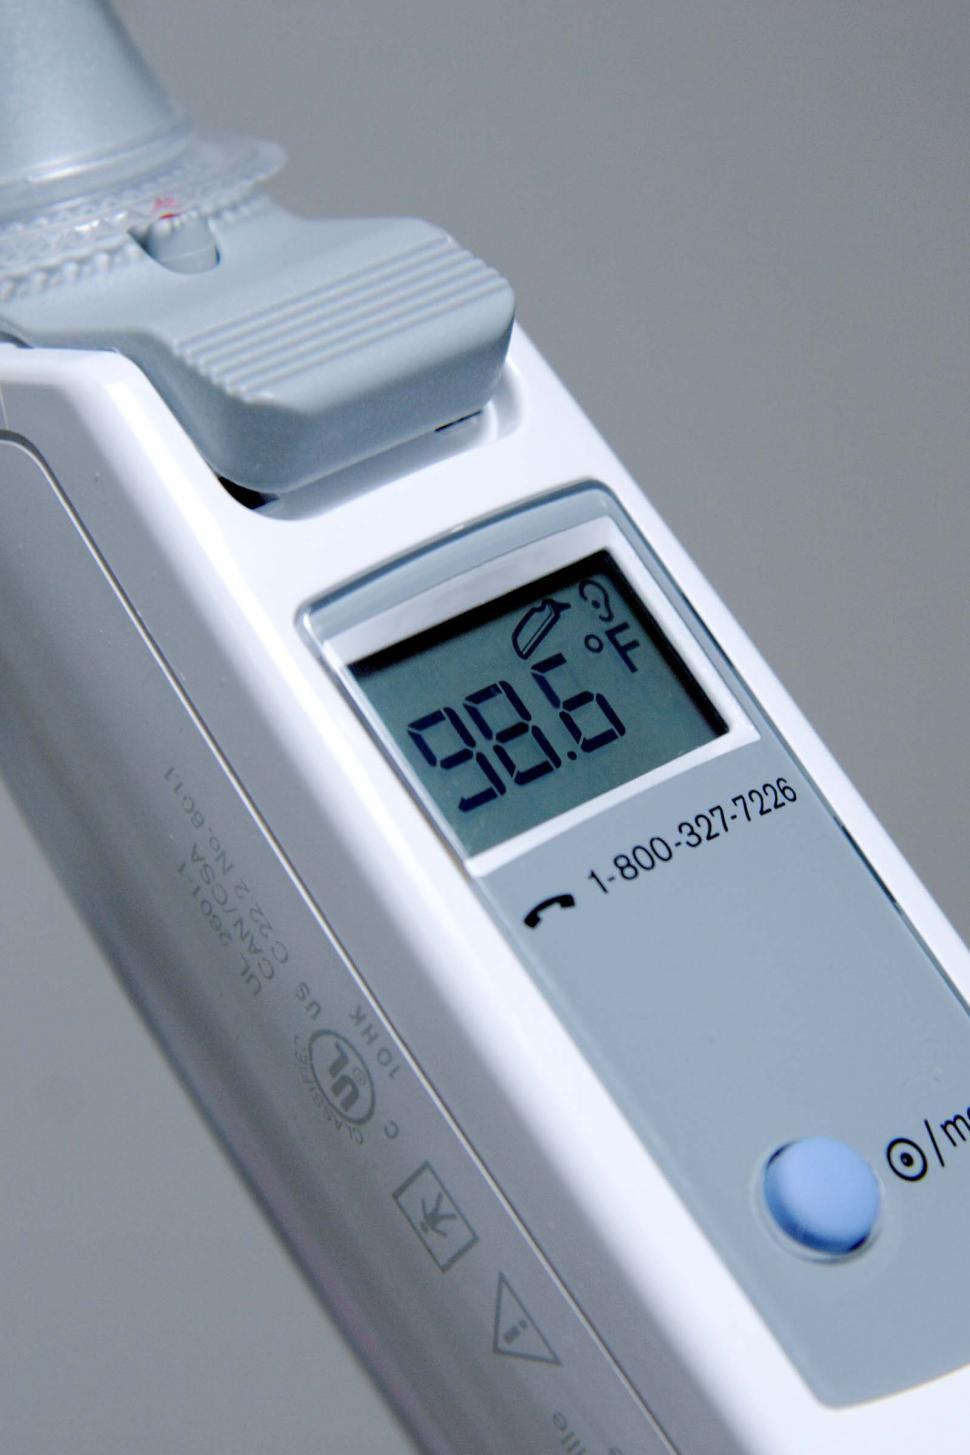 Free Image of Thermometer showing normal body temp 